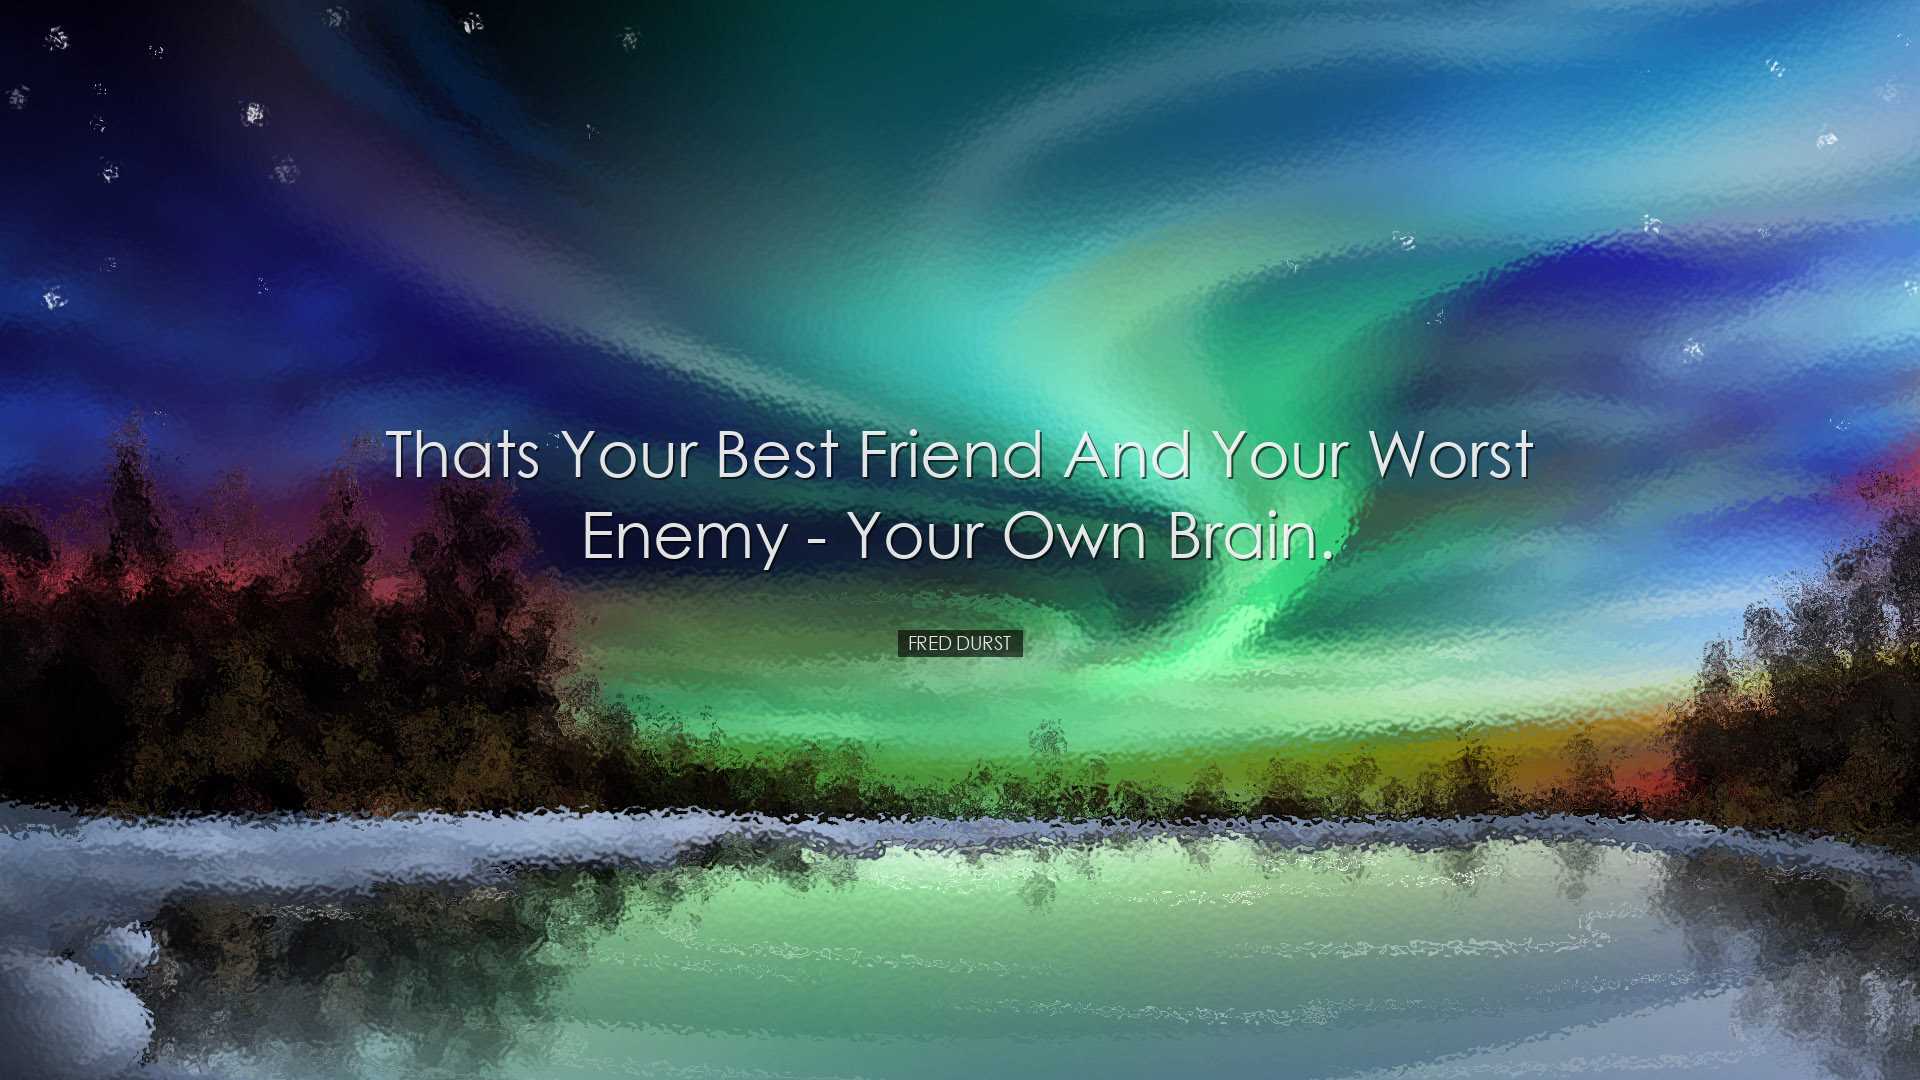 Thats your best friend and your worst enemy - your own brain. - Fr